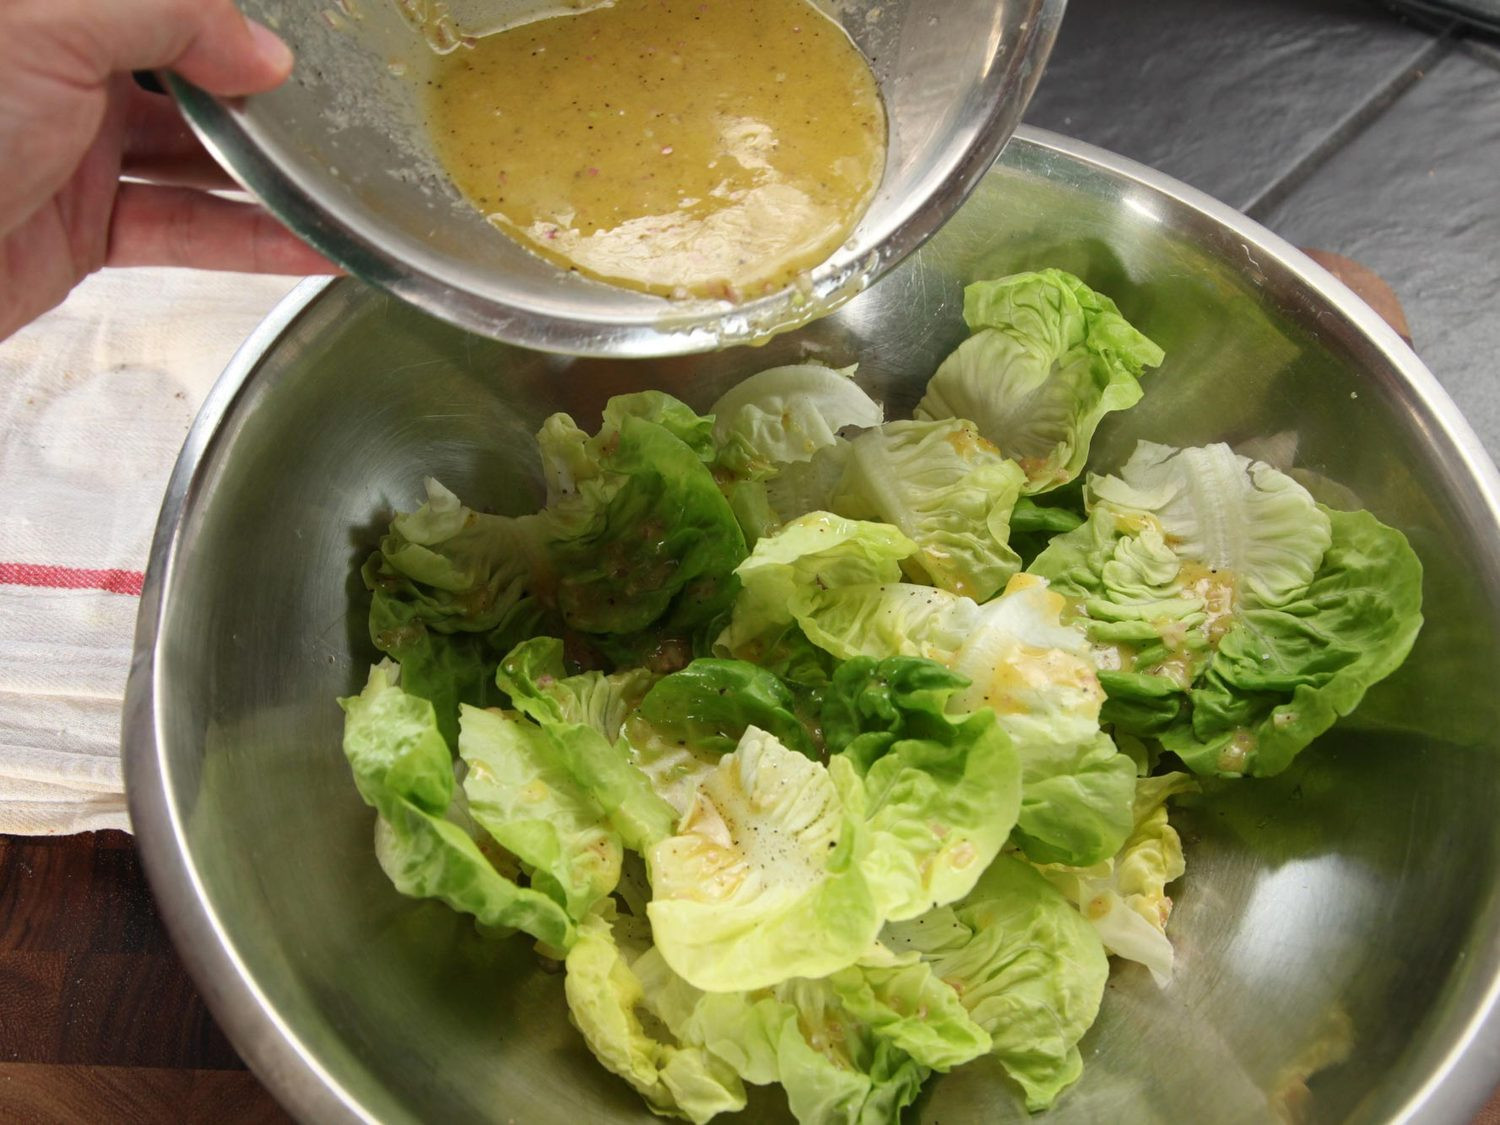 Simple Salad Dressings Recipes
 11 Salad Dressing Recipes to Help You Kick the Bottled